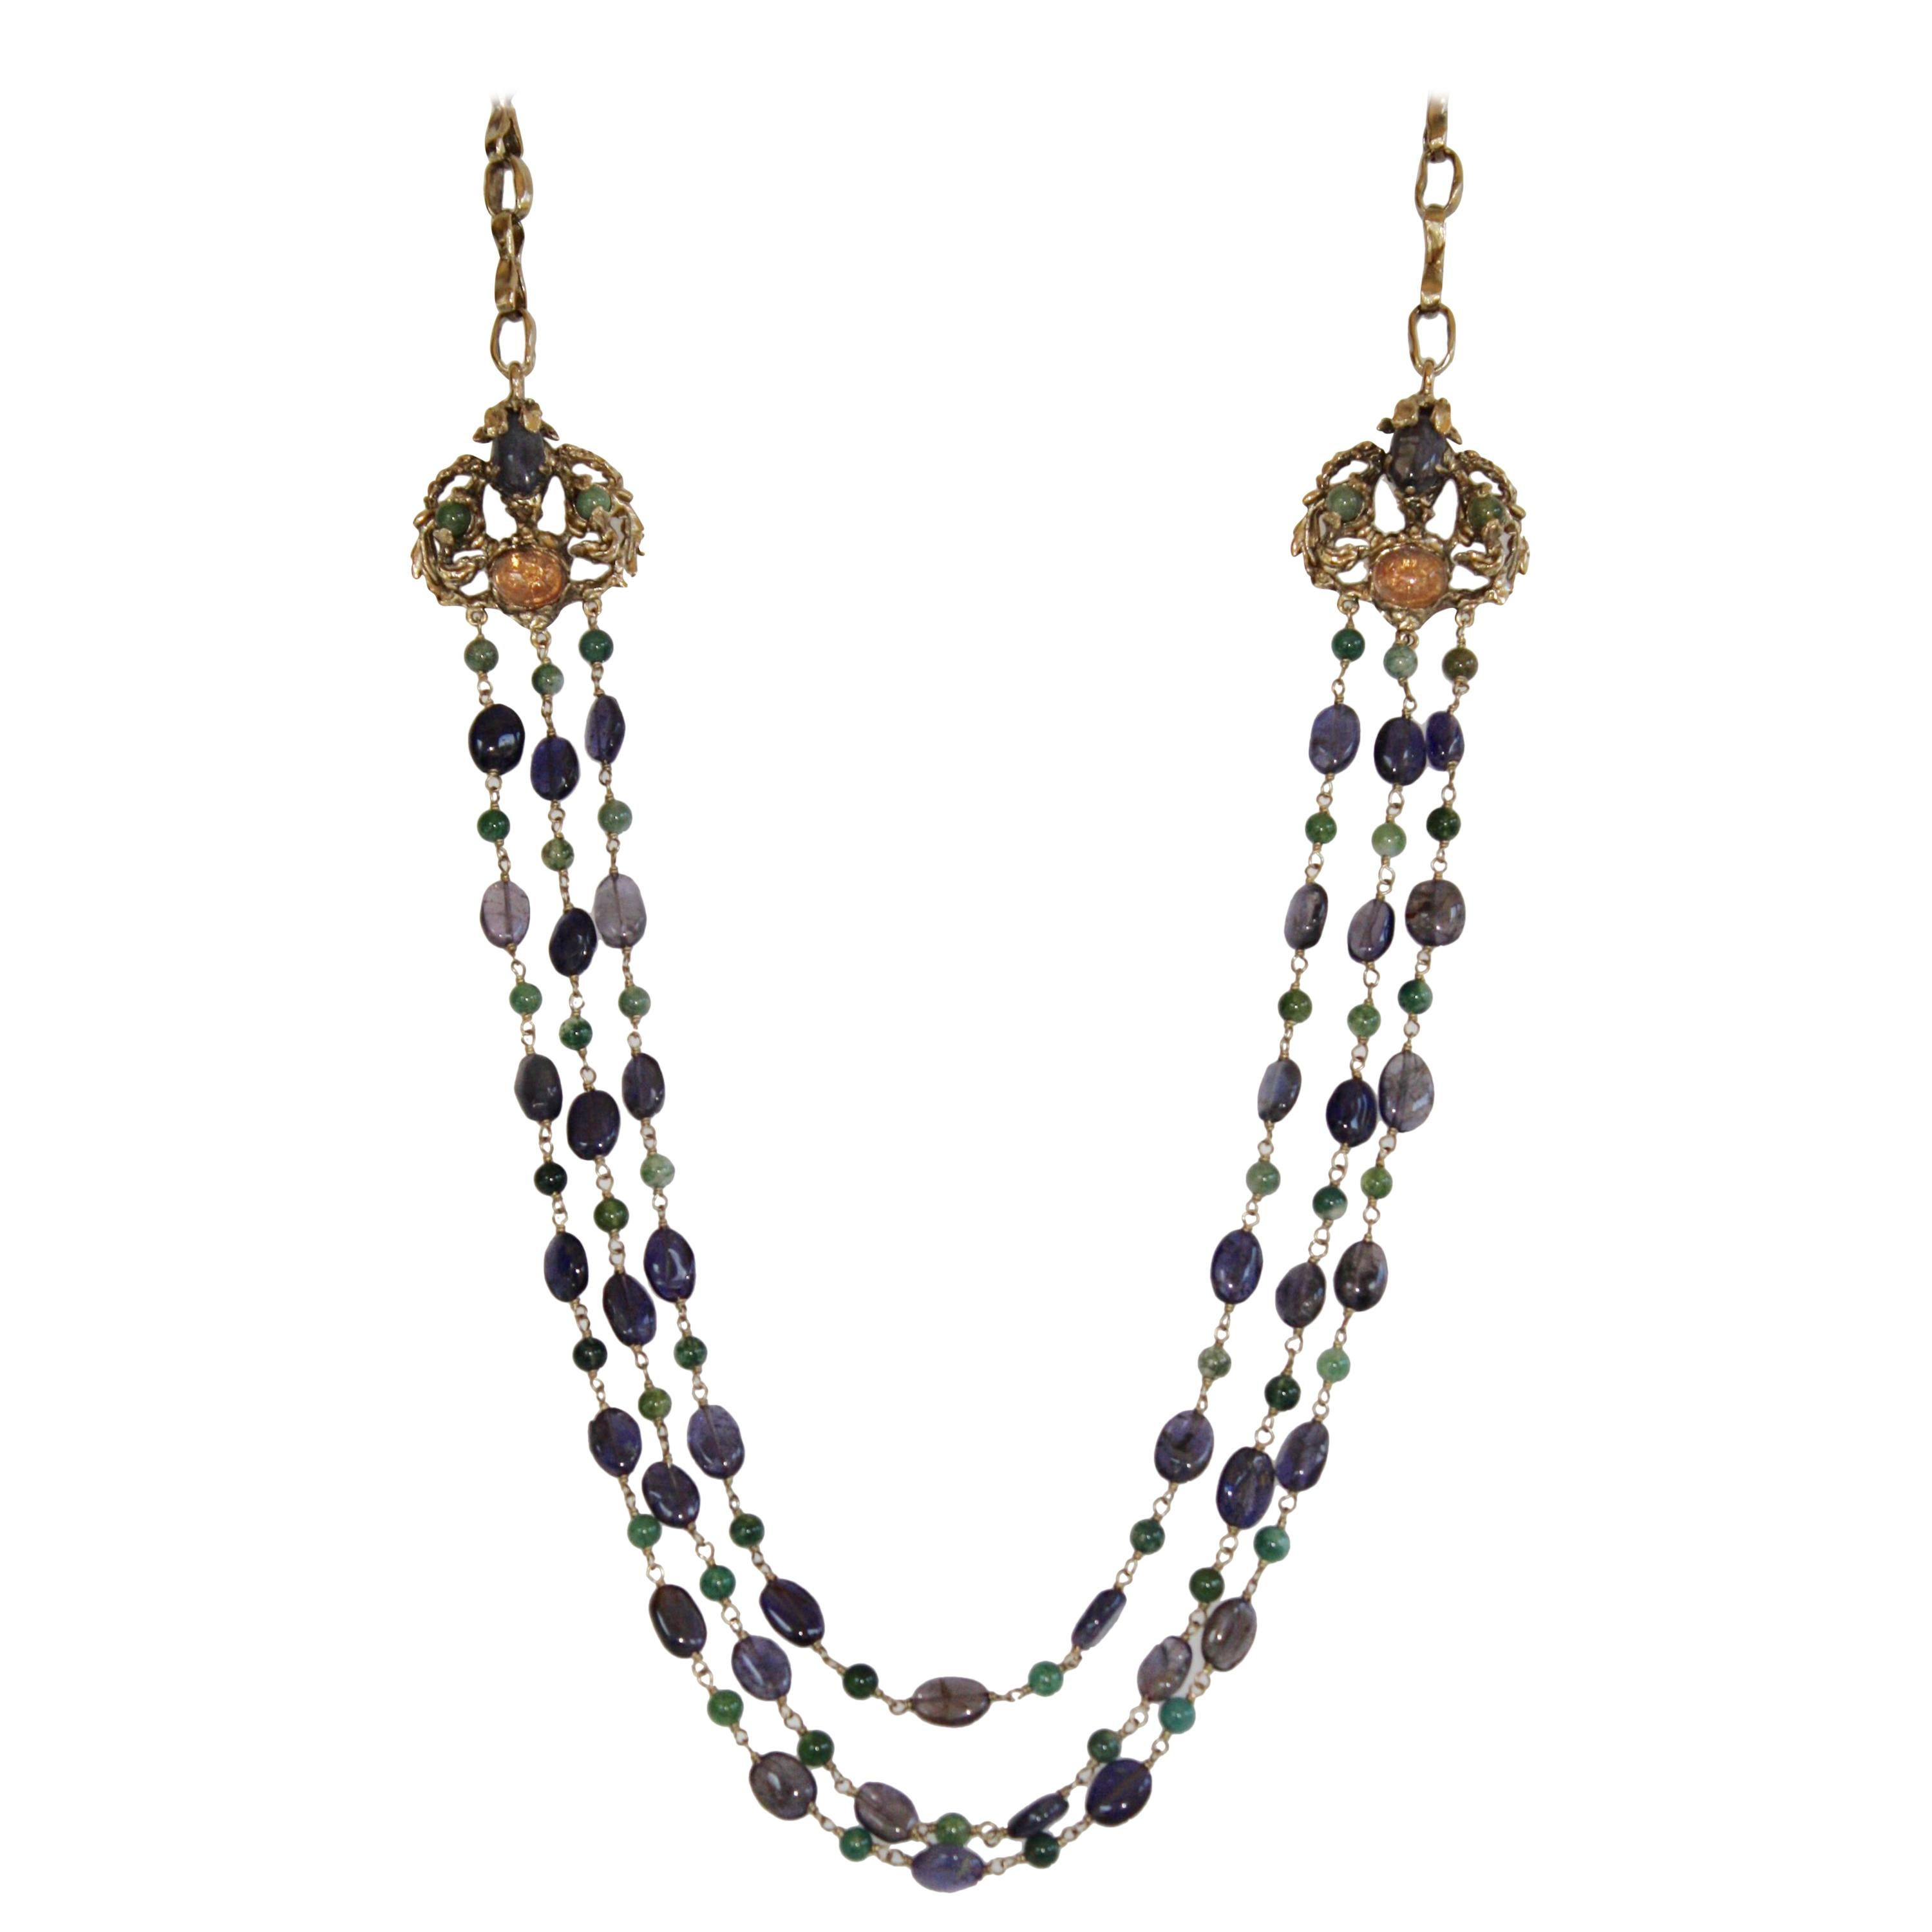 Goossens Paris Iolite and Tinted Rock Crystal Necklace